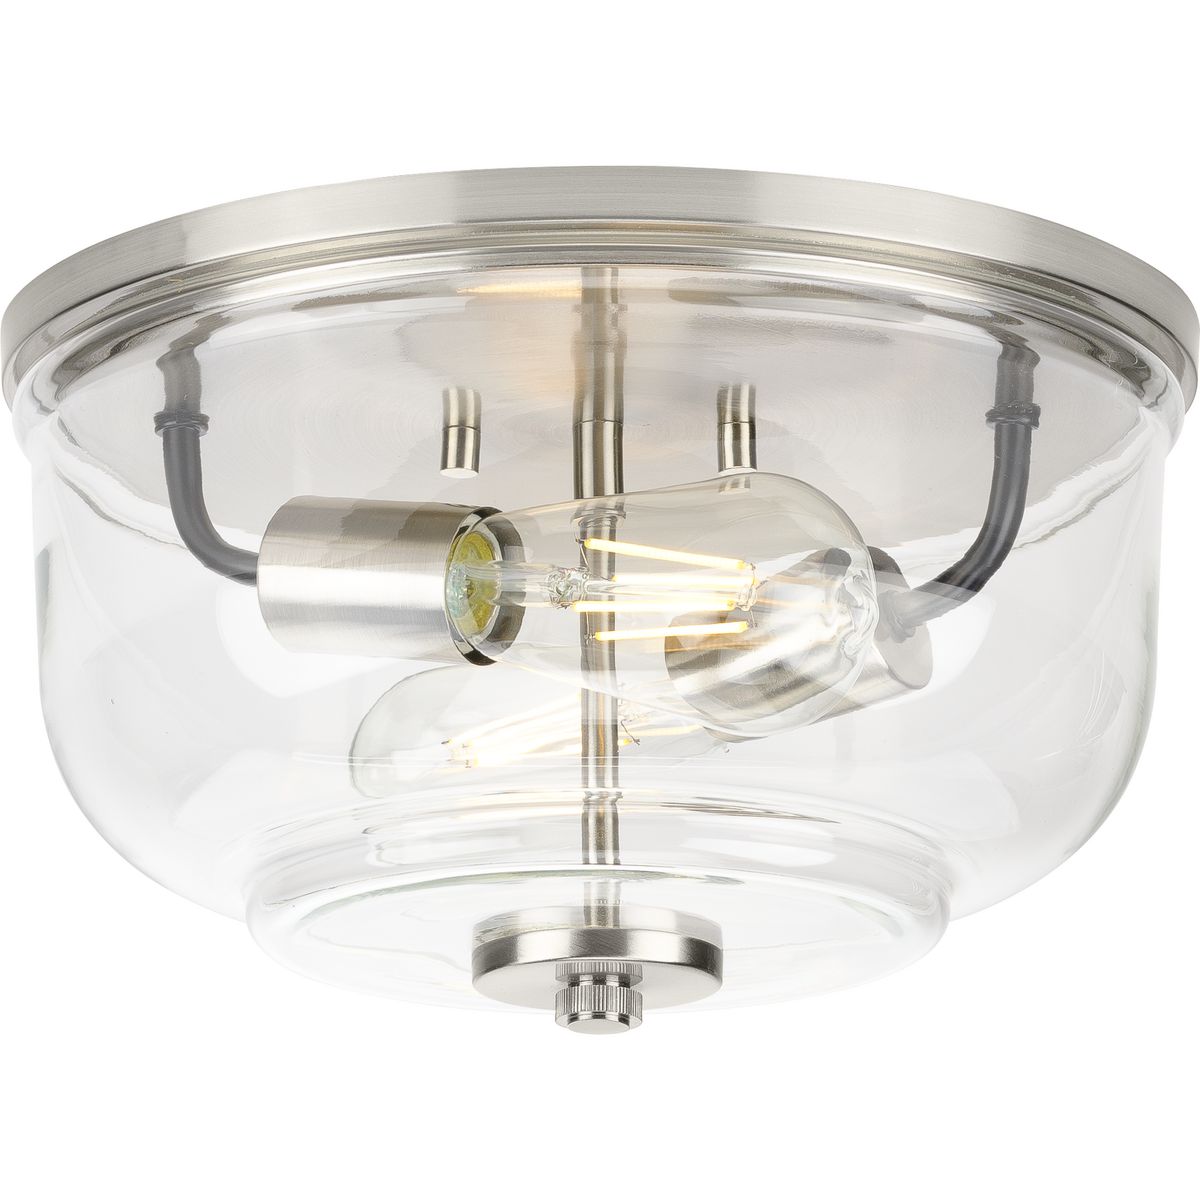 PROGRESS LIGHTING P350205-009 Brushed Nickel Rushton Collection Two-Light Brushed Nickel and Clear Glass Industrial Style Flush Mount Ceiling Light